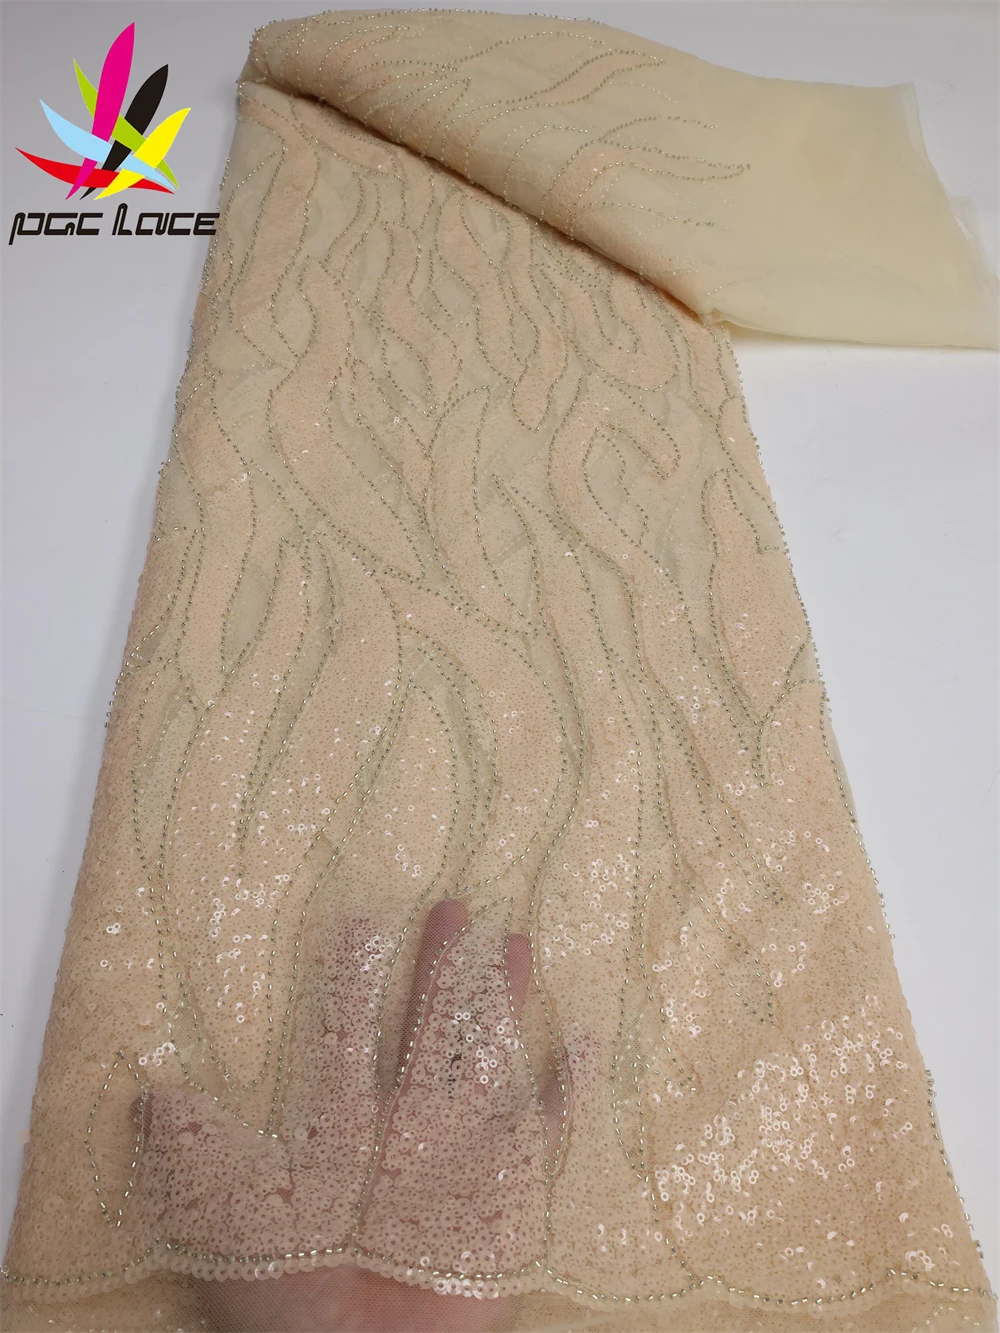 PGC Gold African Groom Lace Fabric 2023 High Quality French Mesh Lace Fabric Sequins Nigerian Lace Fabrics For Wedding pgc white african sequins lace fabric french beaded mesh lace high quality 2021 nigerian lace fabrics for party sewing ya4671b 6